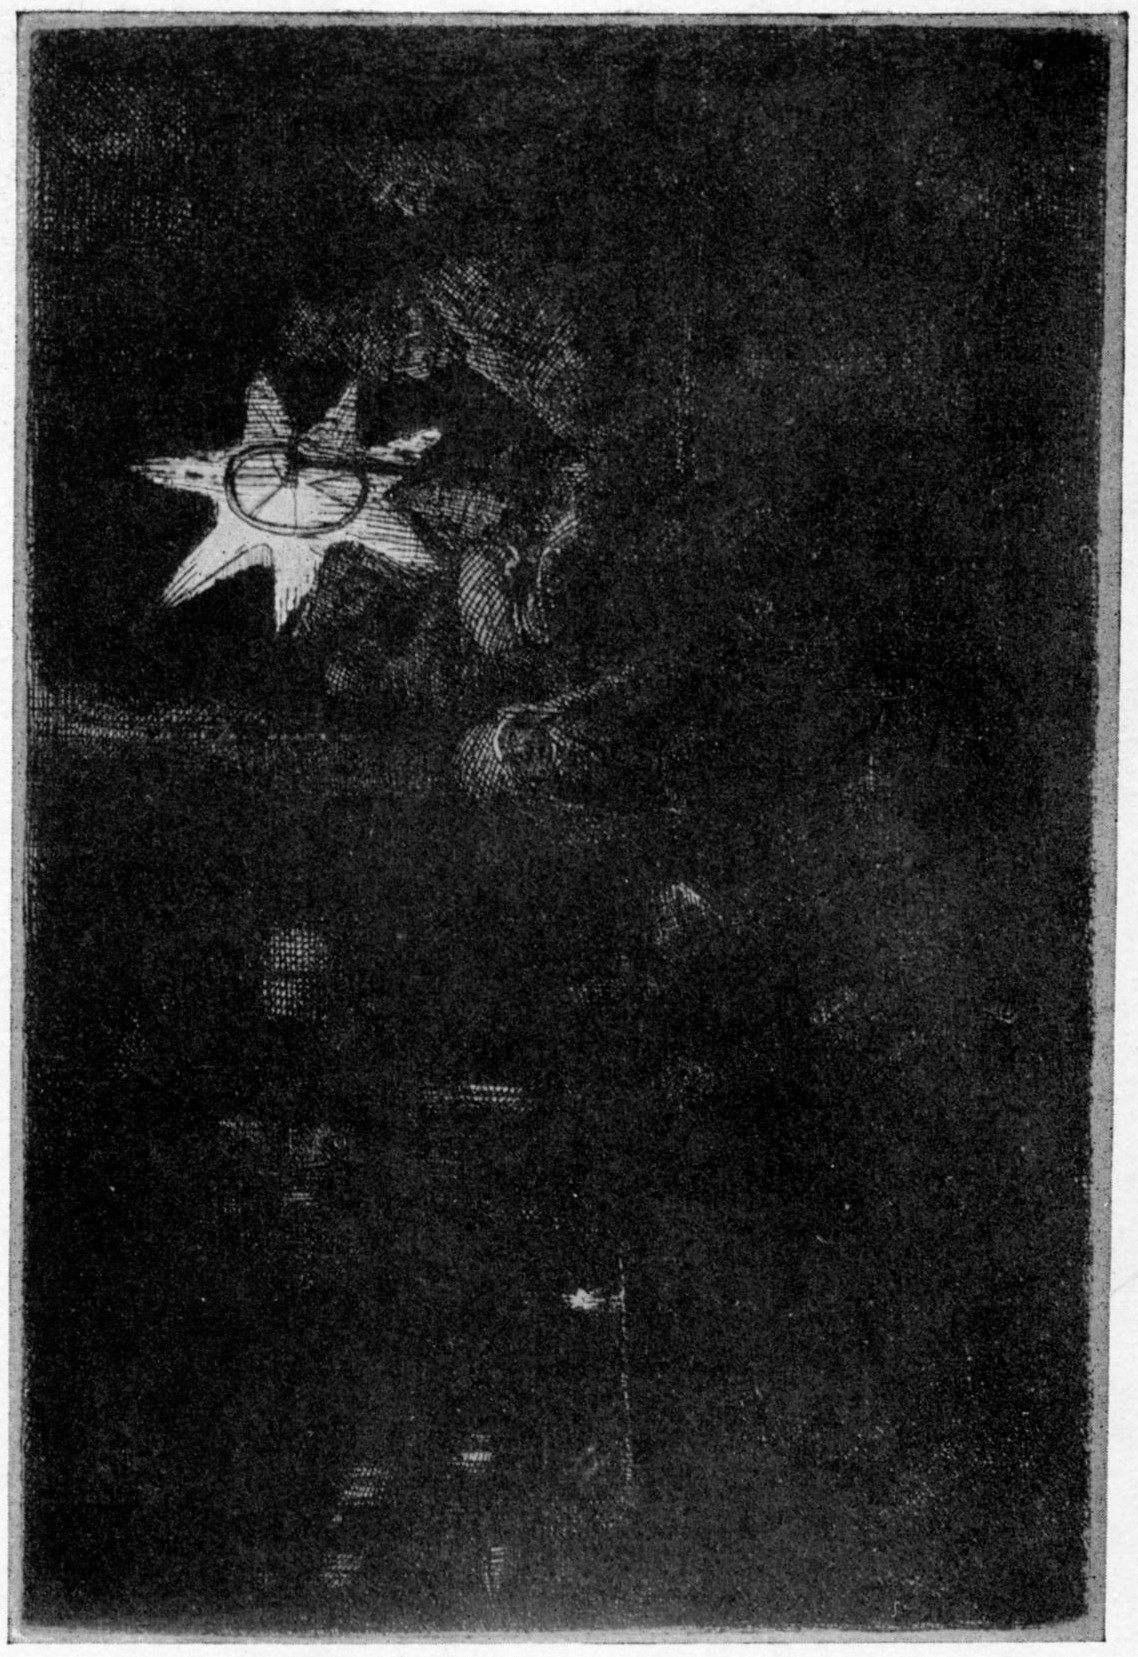 254. THE STAR OF THE KINGS: A NIGHT PIECE. (1652.) B. 113